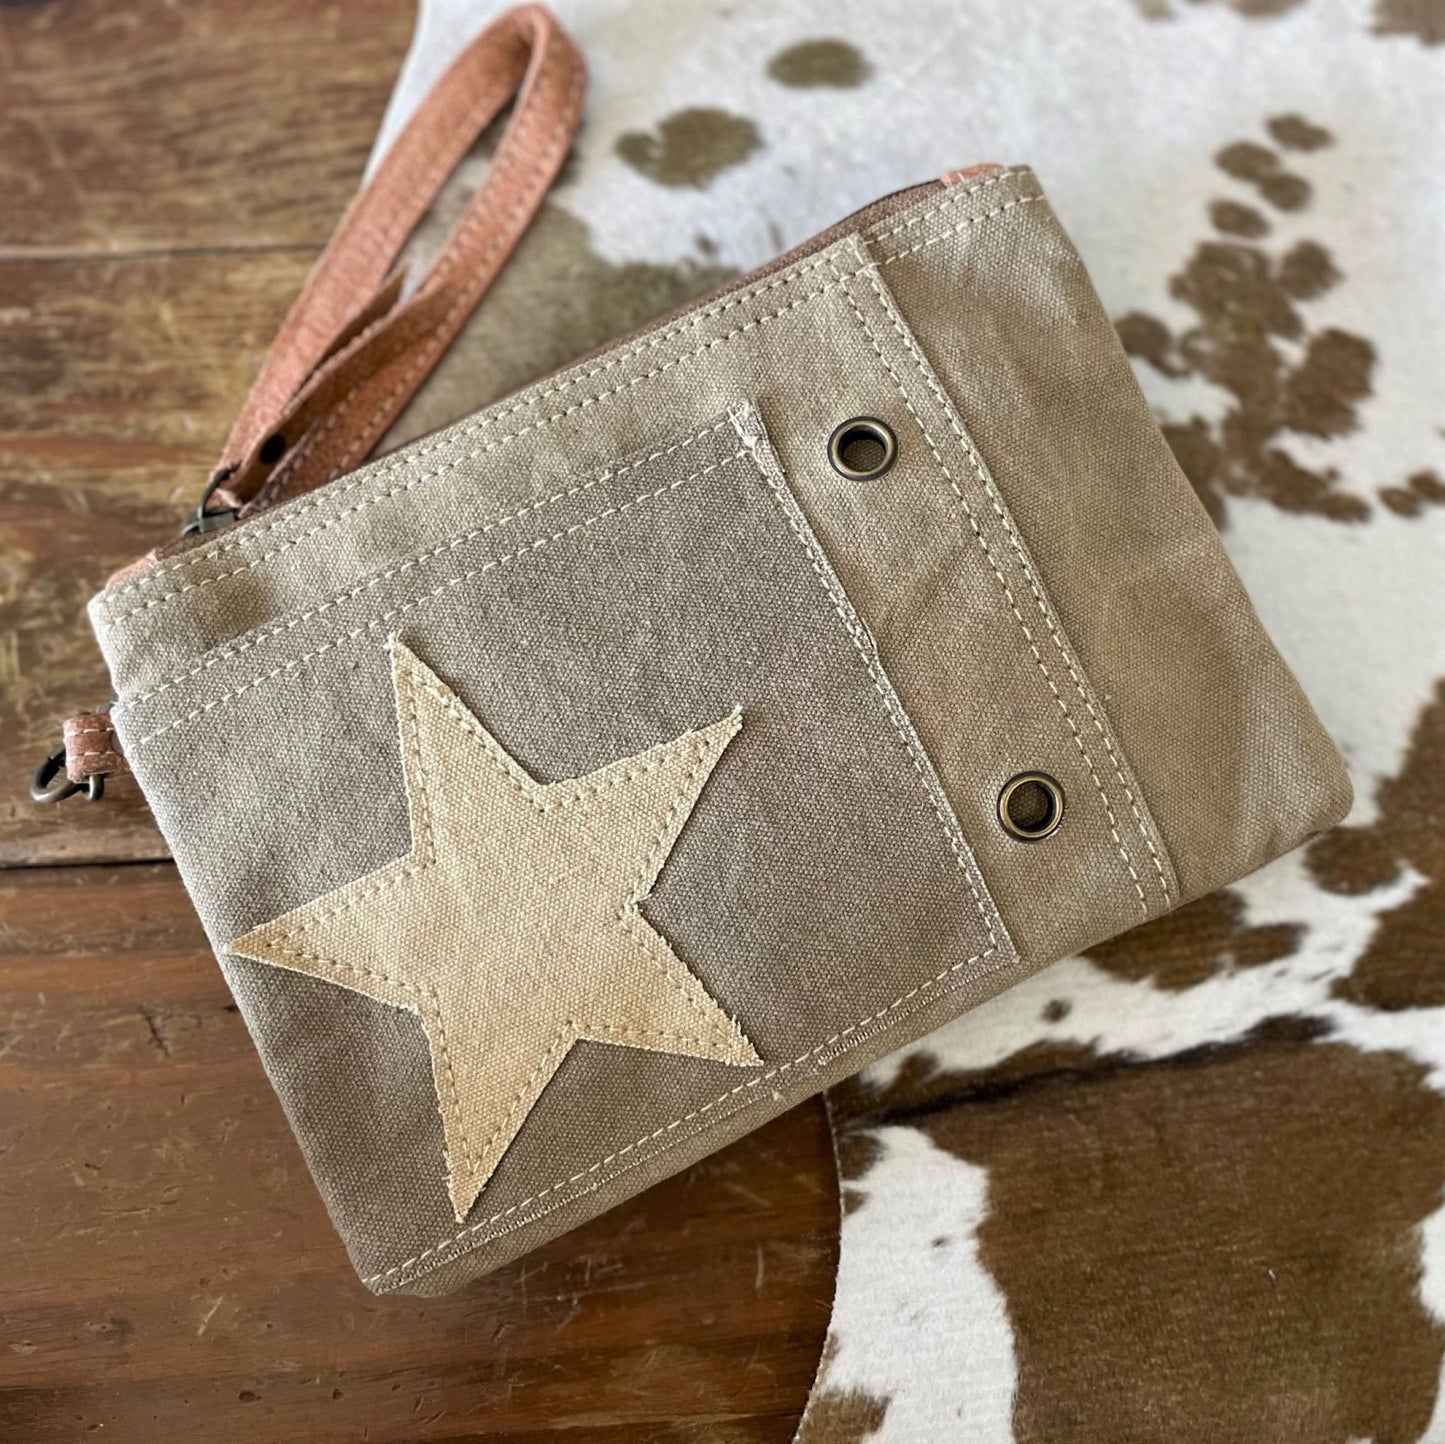 UpCycled Star Wristlet - Stand Alone Wristlet or Great Add to Another Bag!